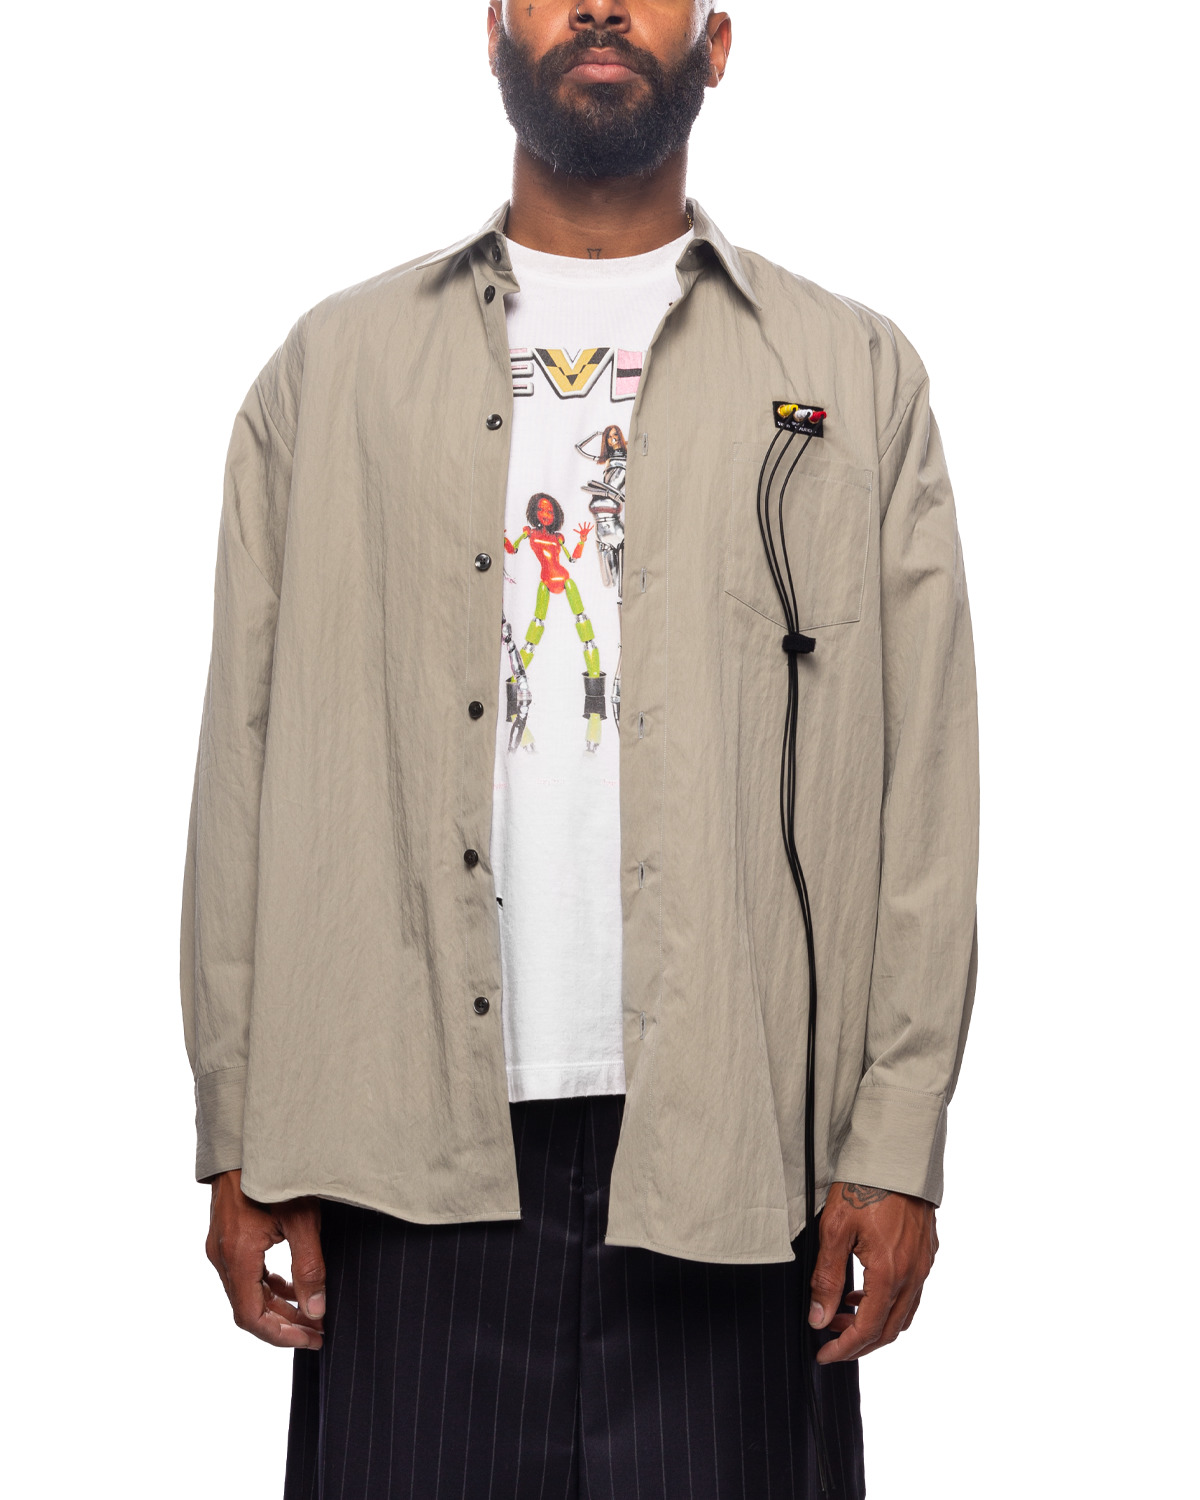 RCA Cable Embroidery Shirt Grey - 1